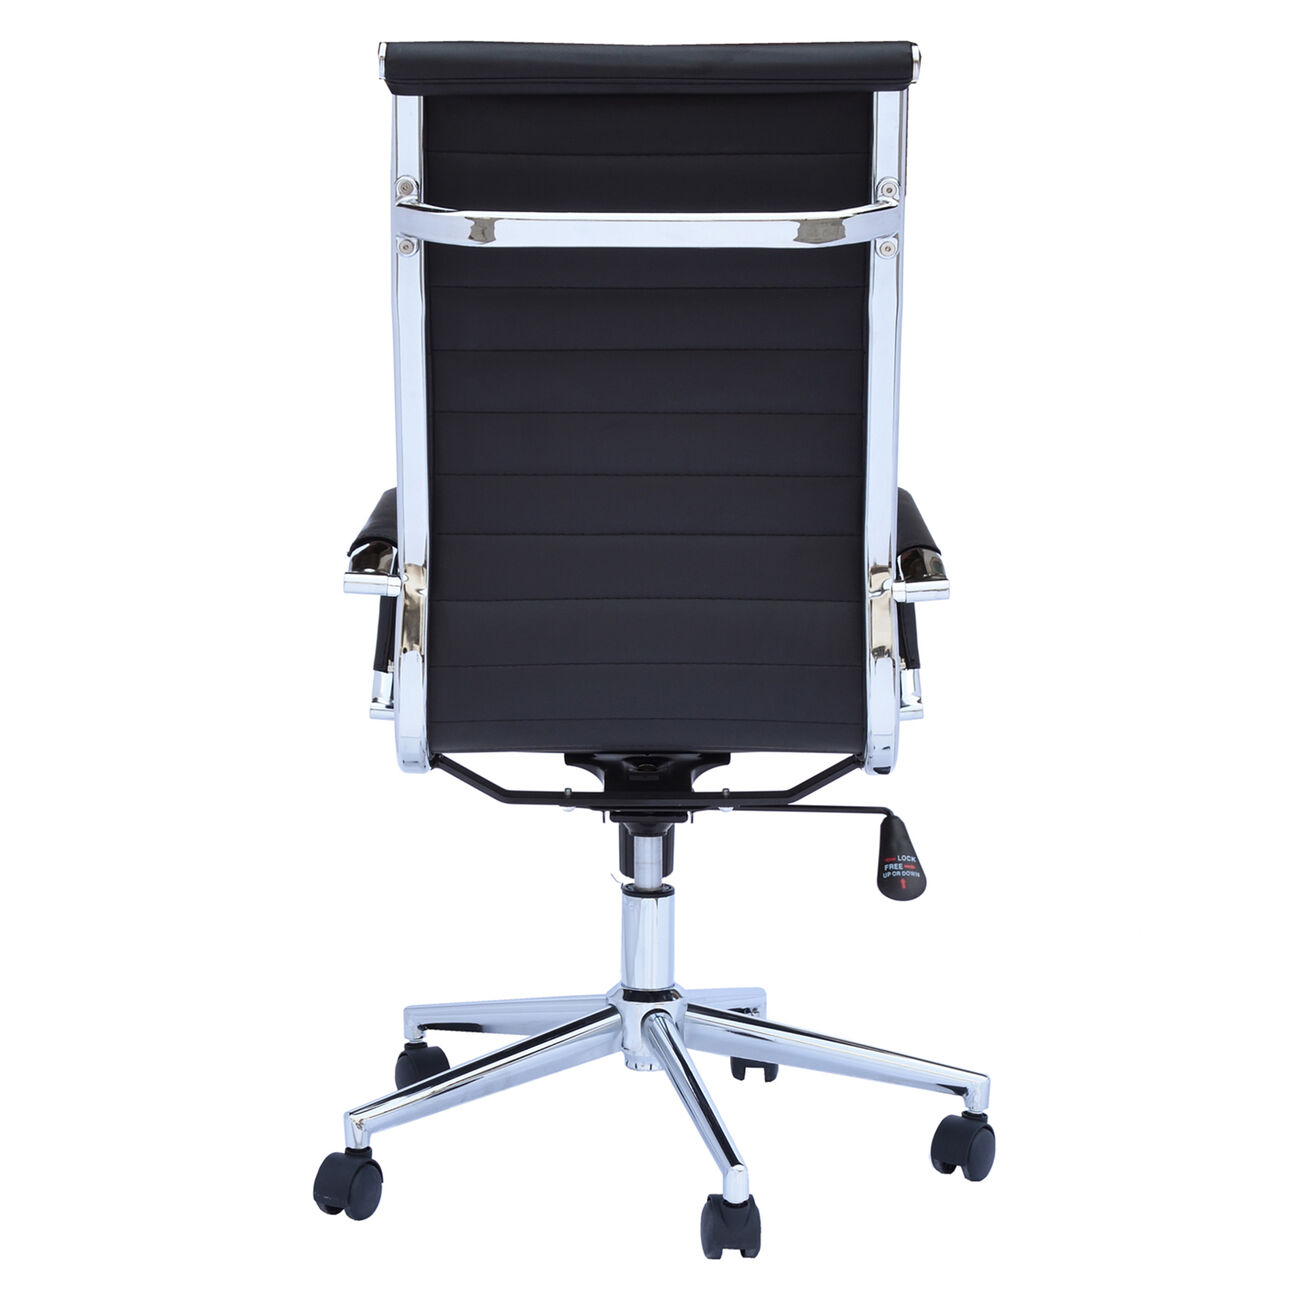 Adjustable Horizontal Ribbed Ergonomic Leatherette Office Chair with Casters, Black and Chrome